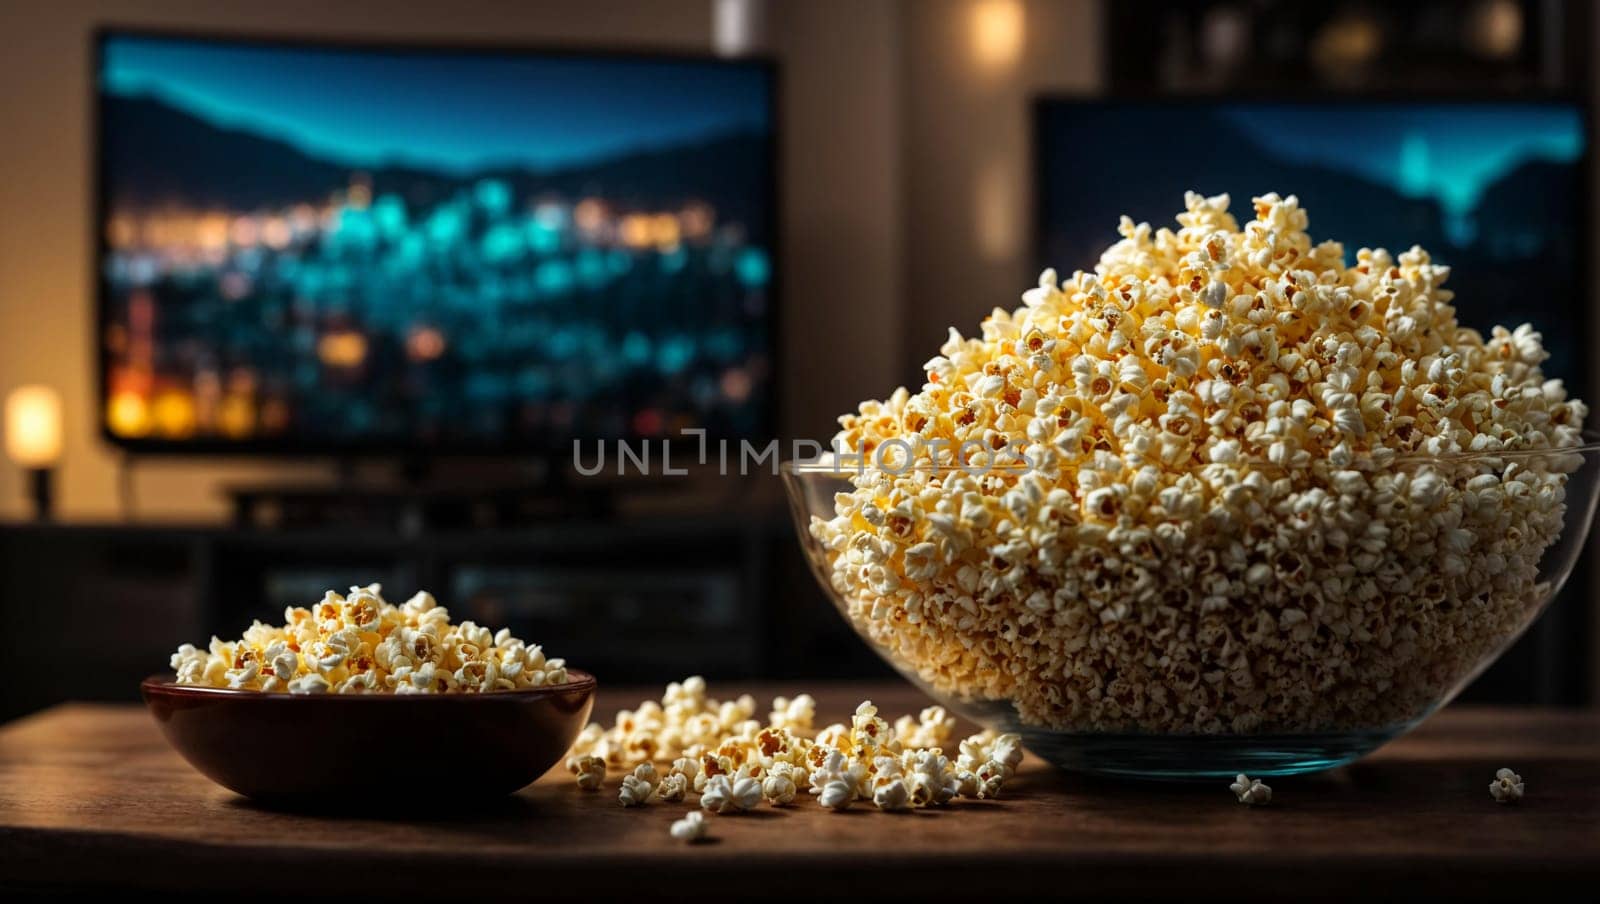 Popcorn in a glass bowl in front of the TV by Севостьянов